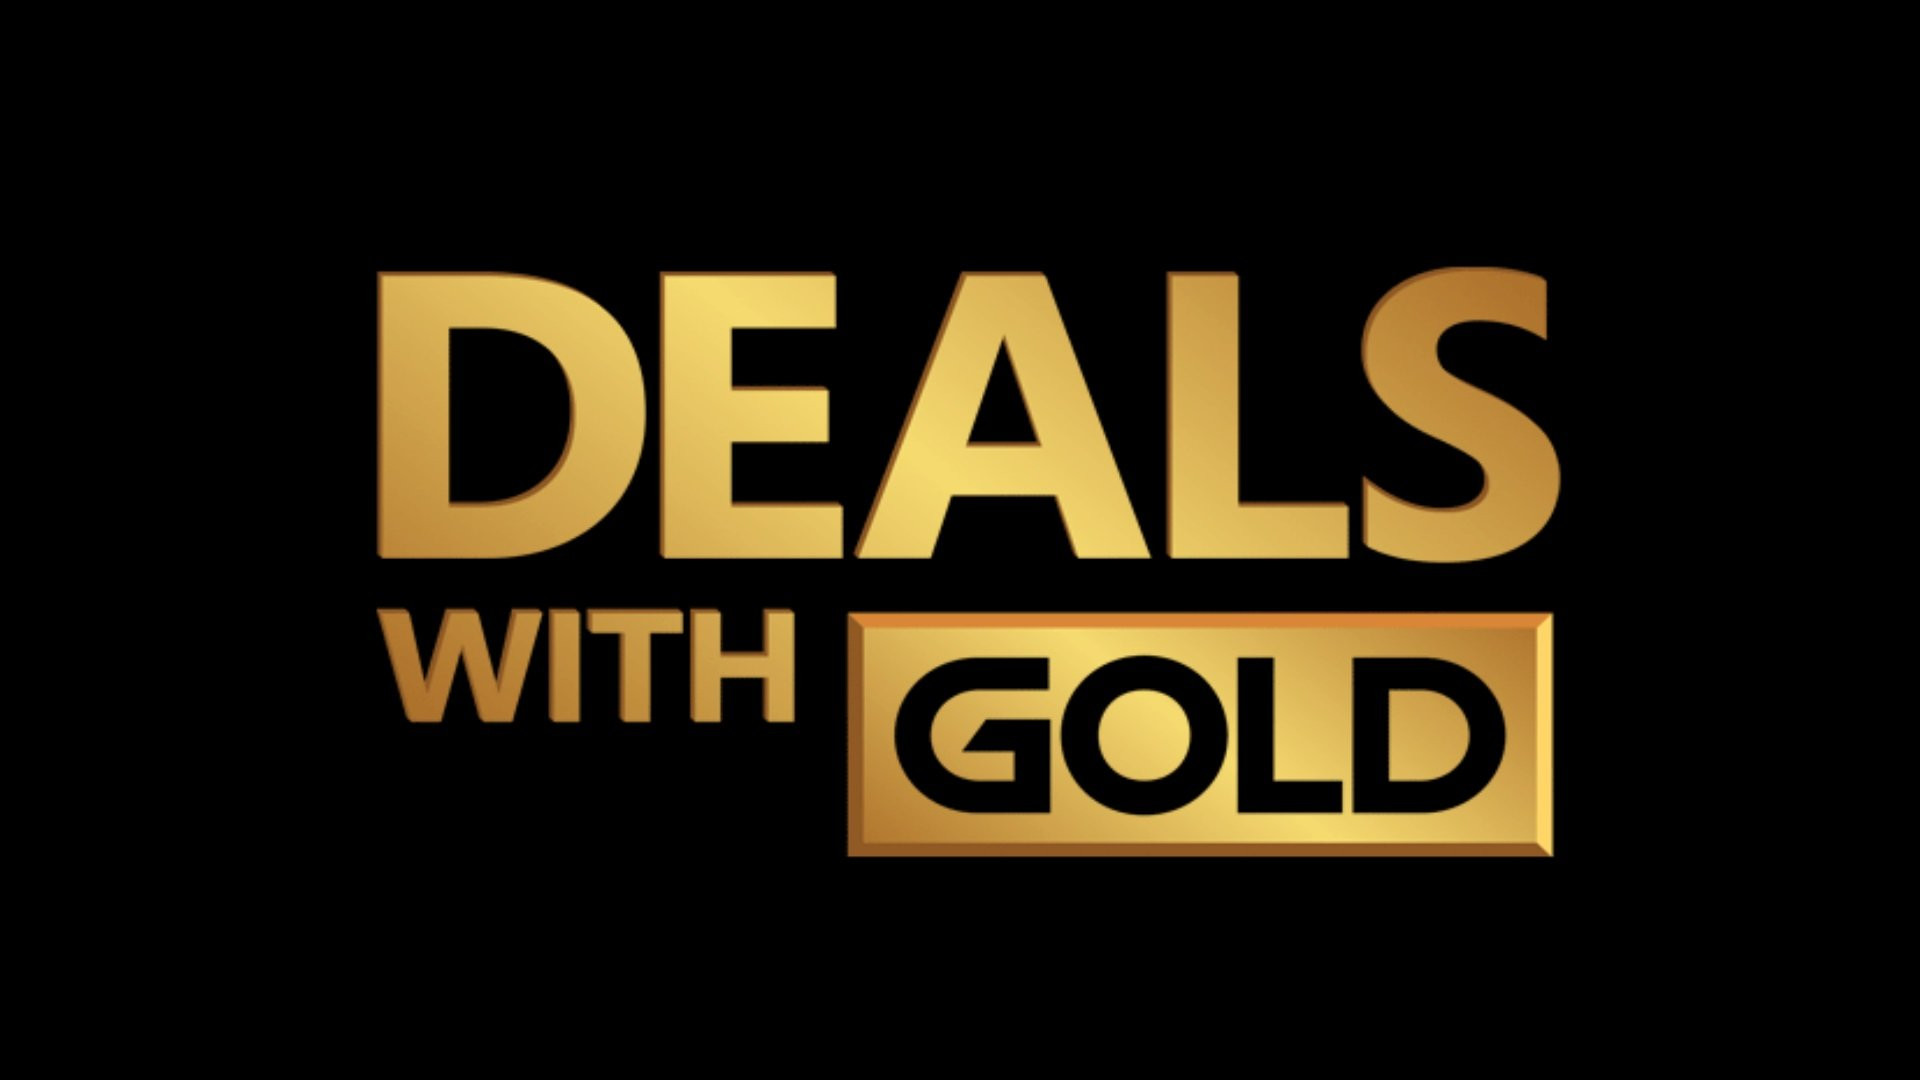 Deals with Gold semaine 40